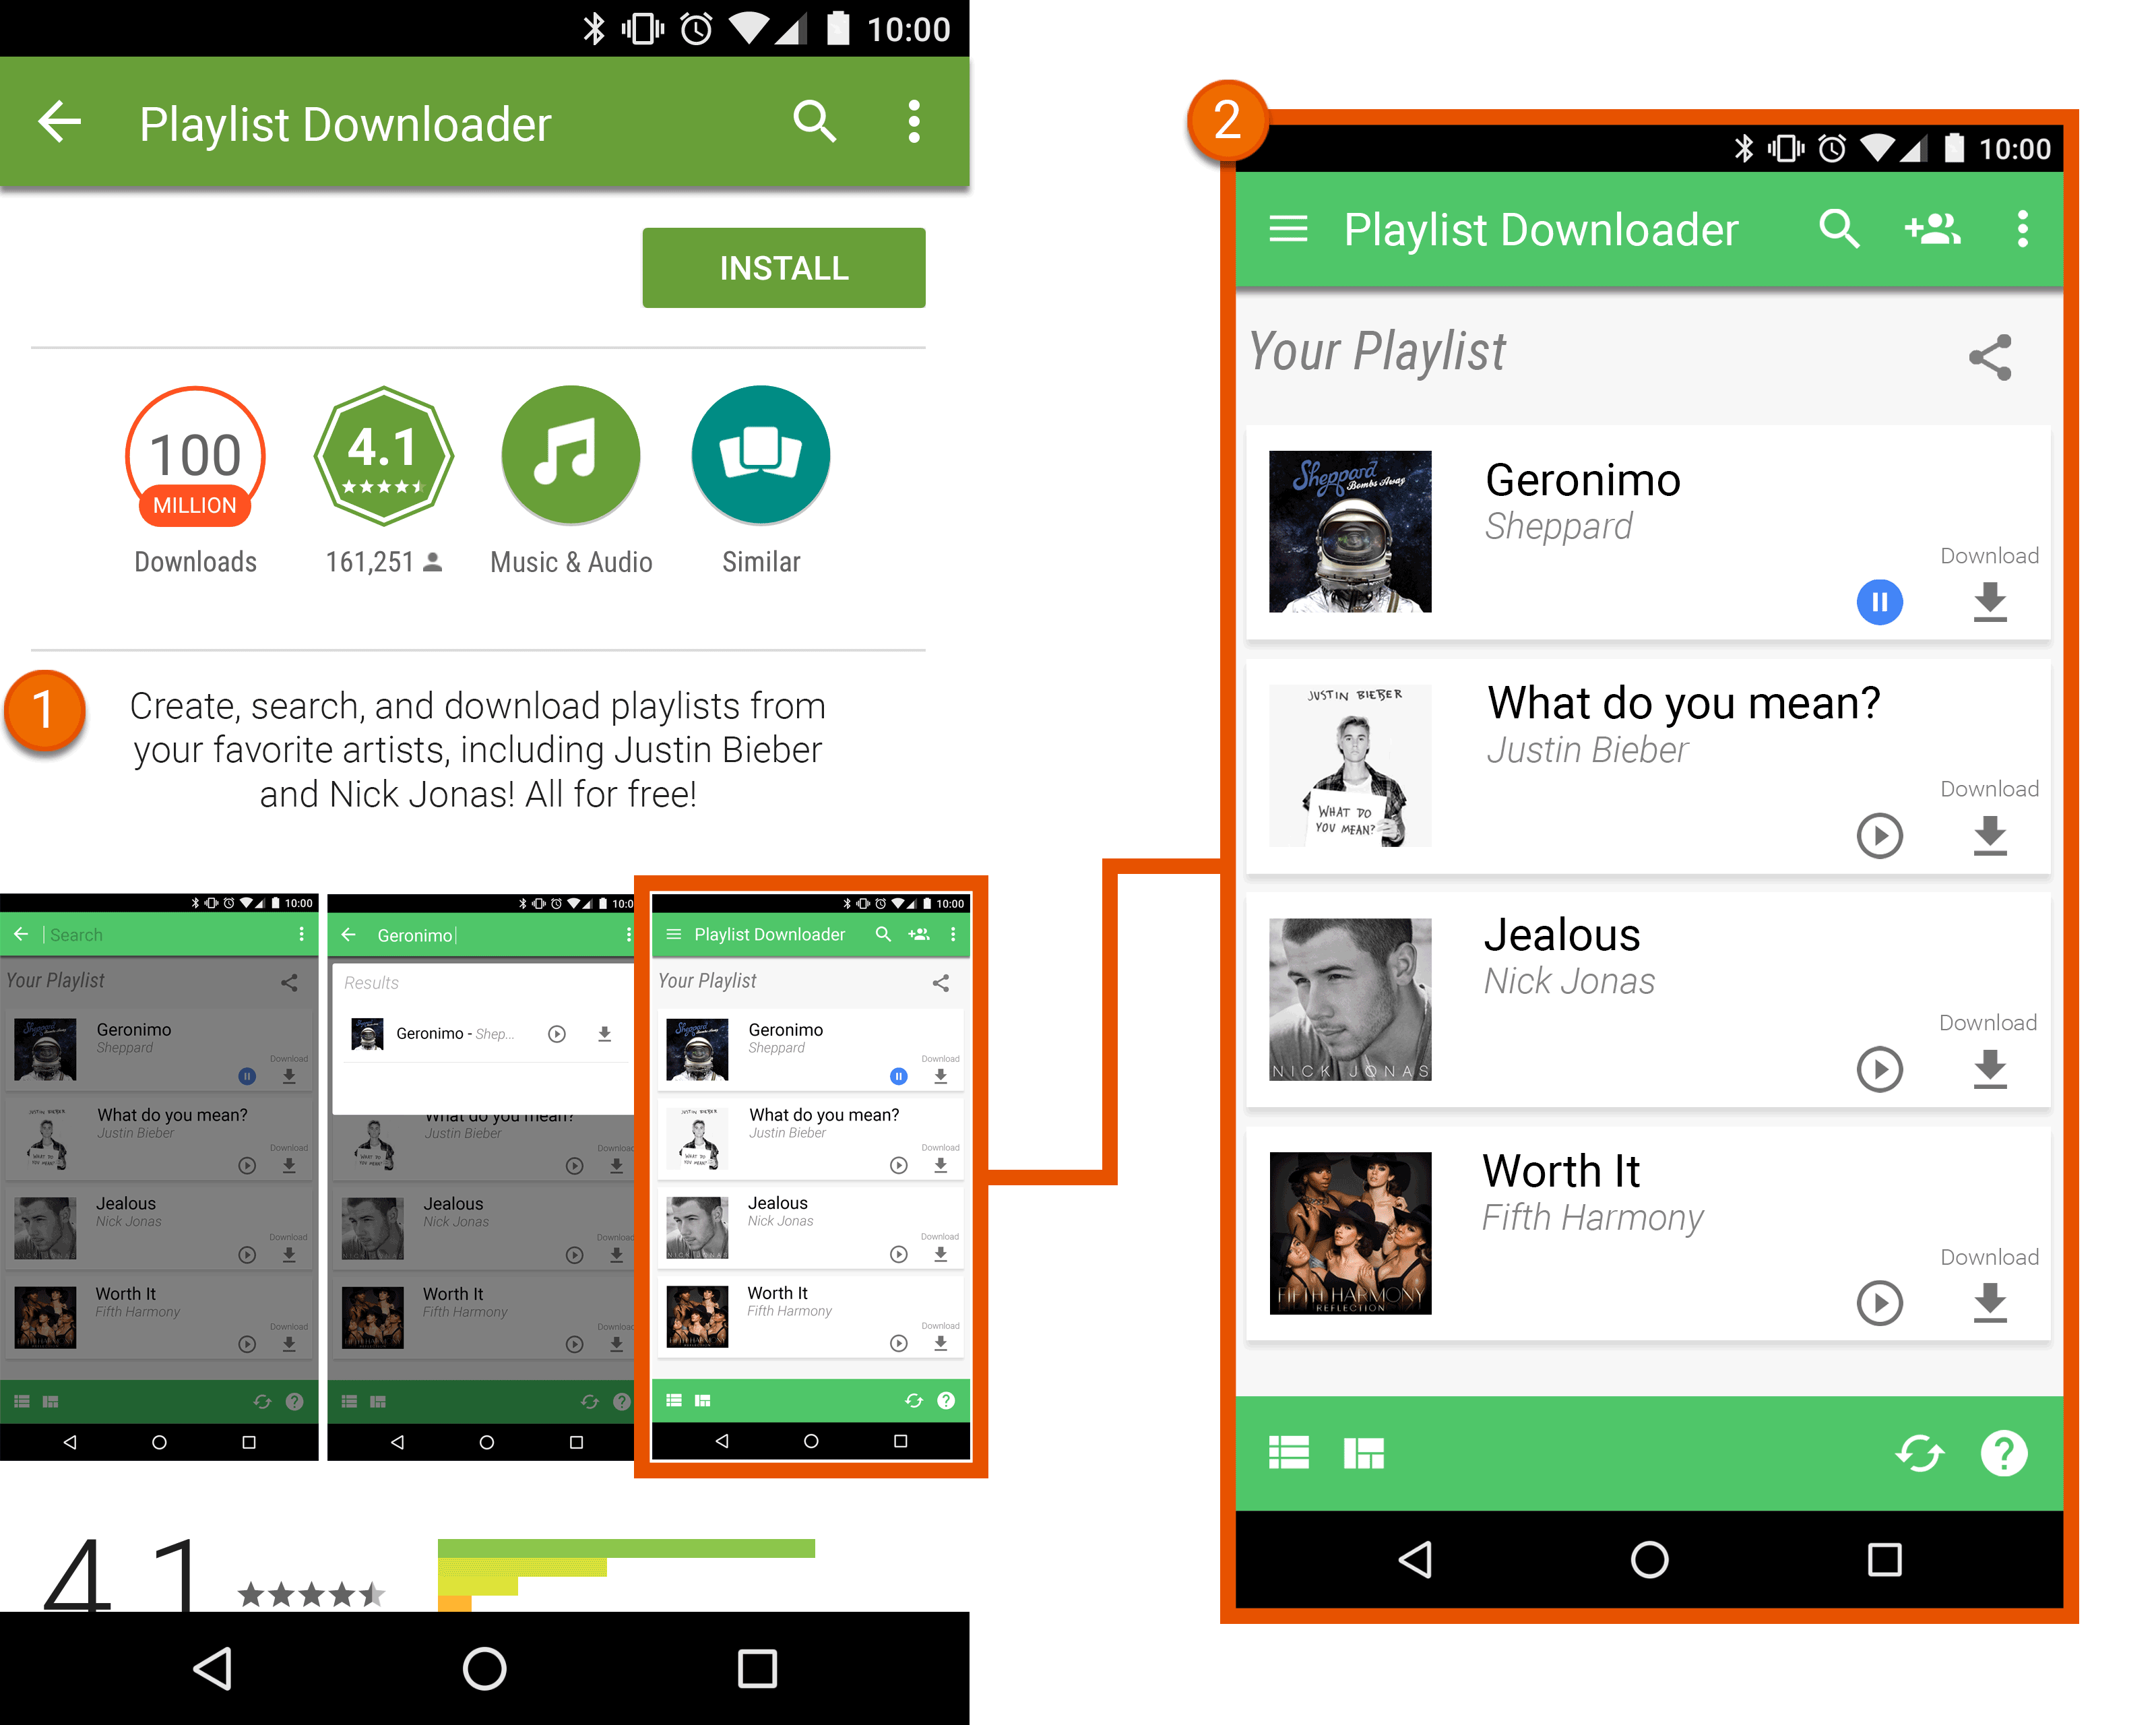 Apps that encourage users to stream and copyrighted works including music and video in violation of applicable copyright law